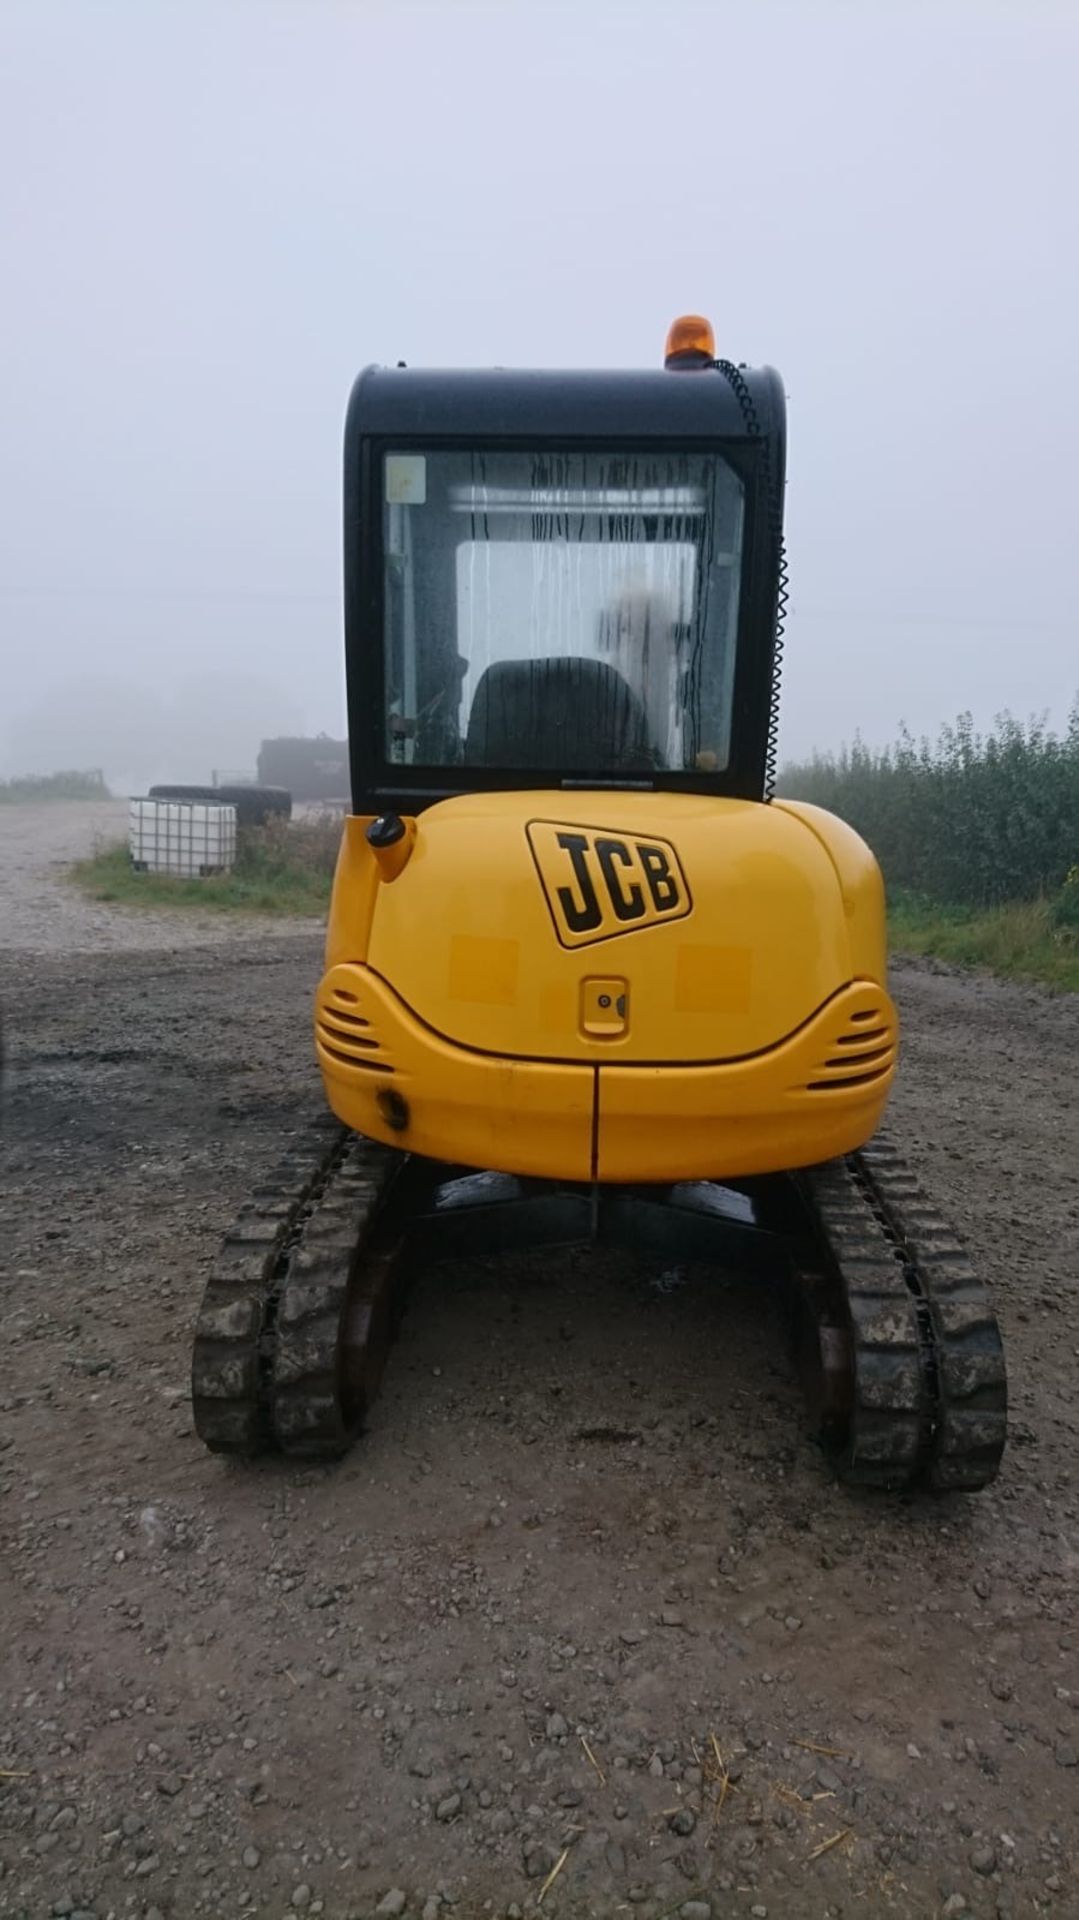 JCB SO8027z 2002 3T DIGGER 2385HOURS c/w BUCKETS &QUICK HITCH HEADSTOCK - Image 3 of 3